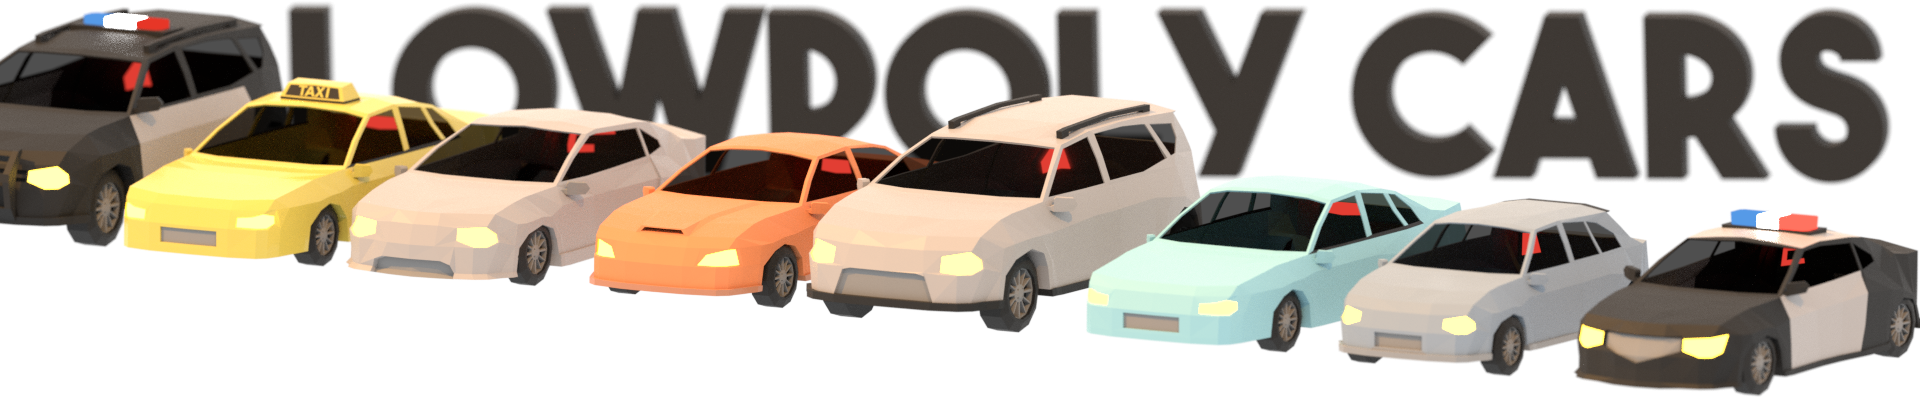 LowPoly Cars